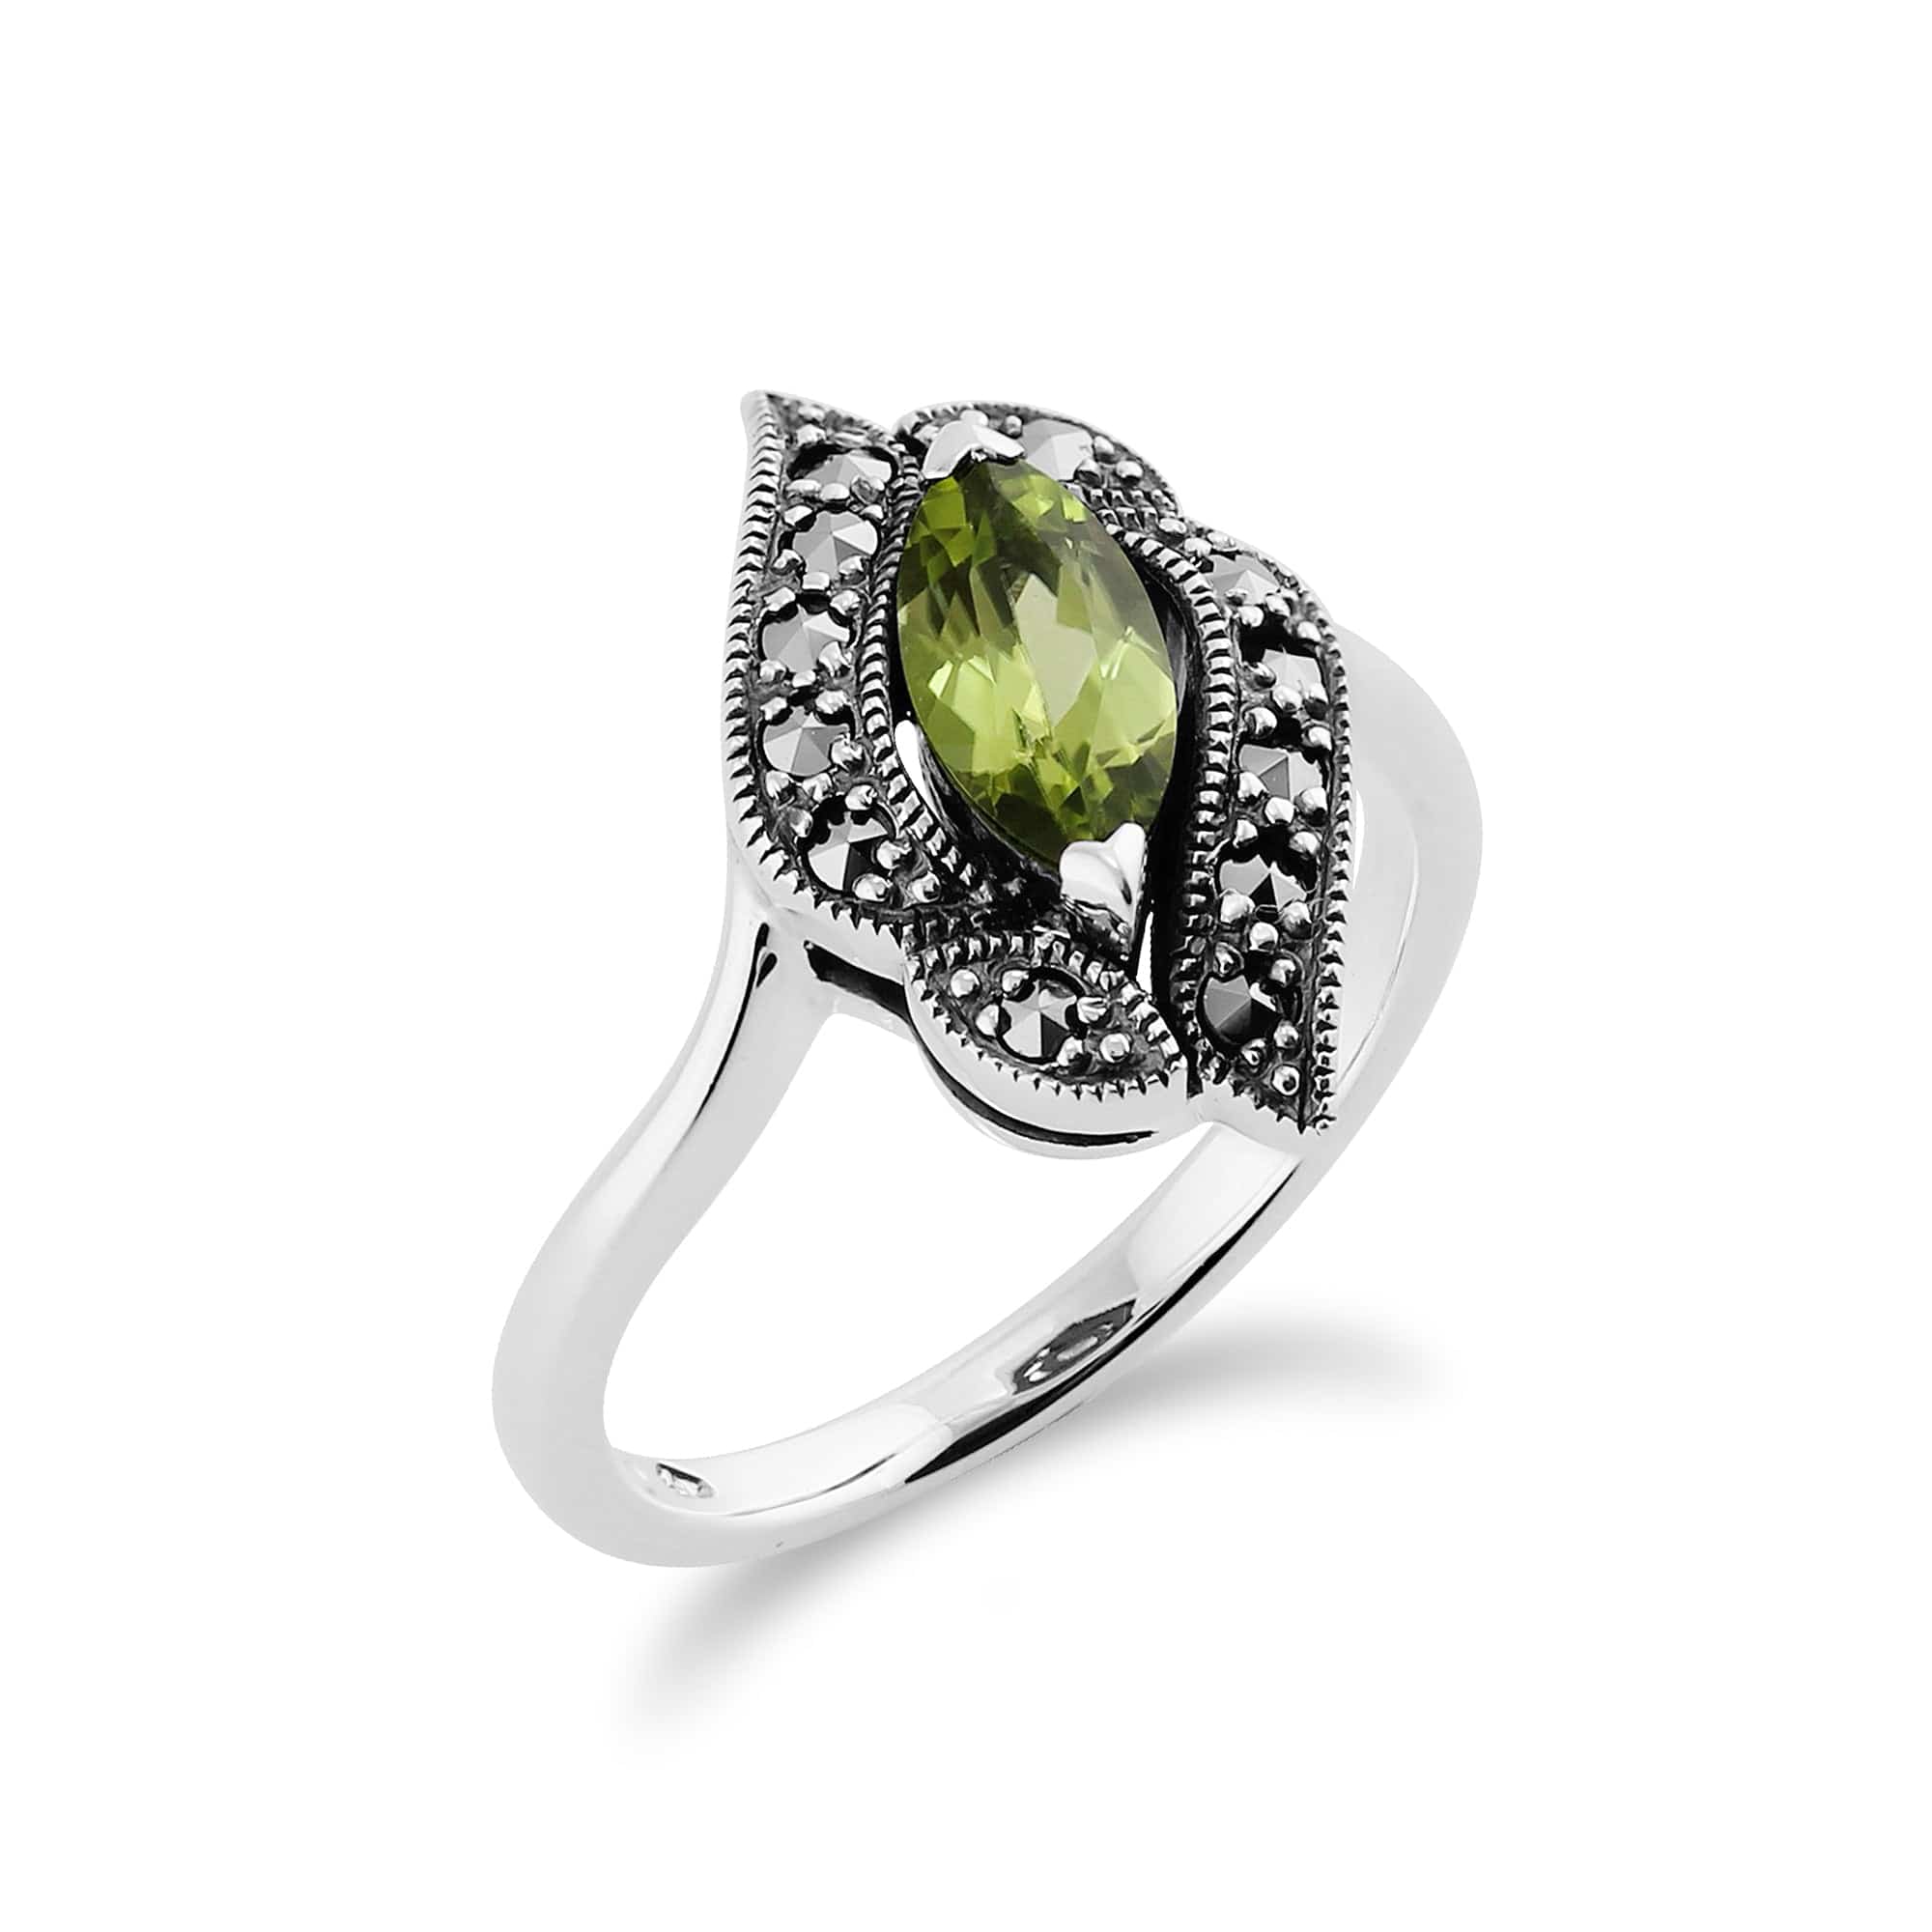 214R392602925 Art Nouveau Style Marquise Peridot & Marcasite Silver Ring 2